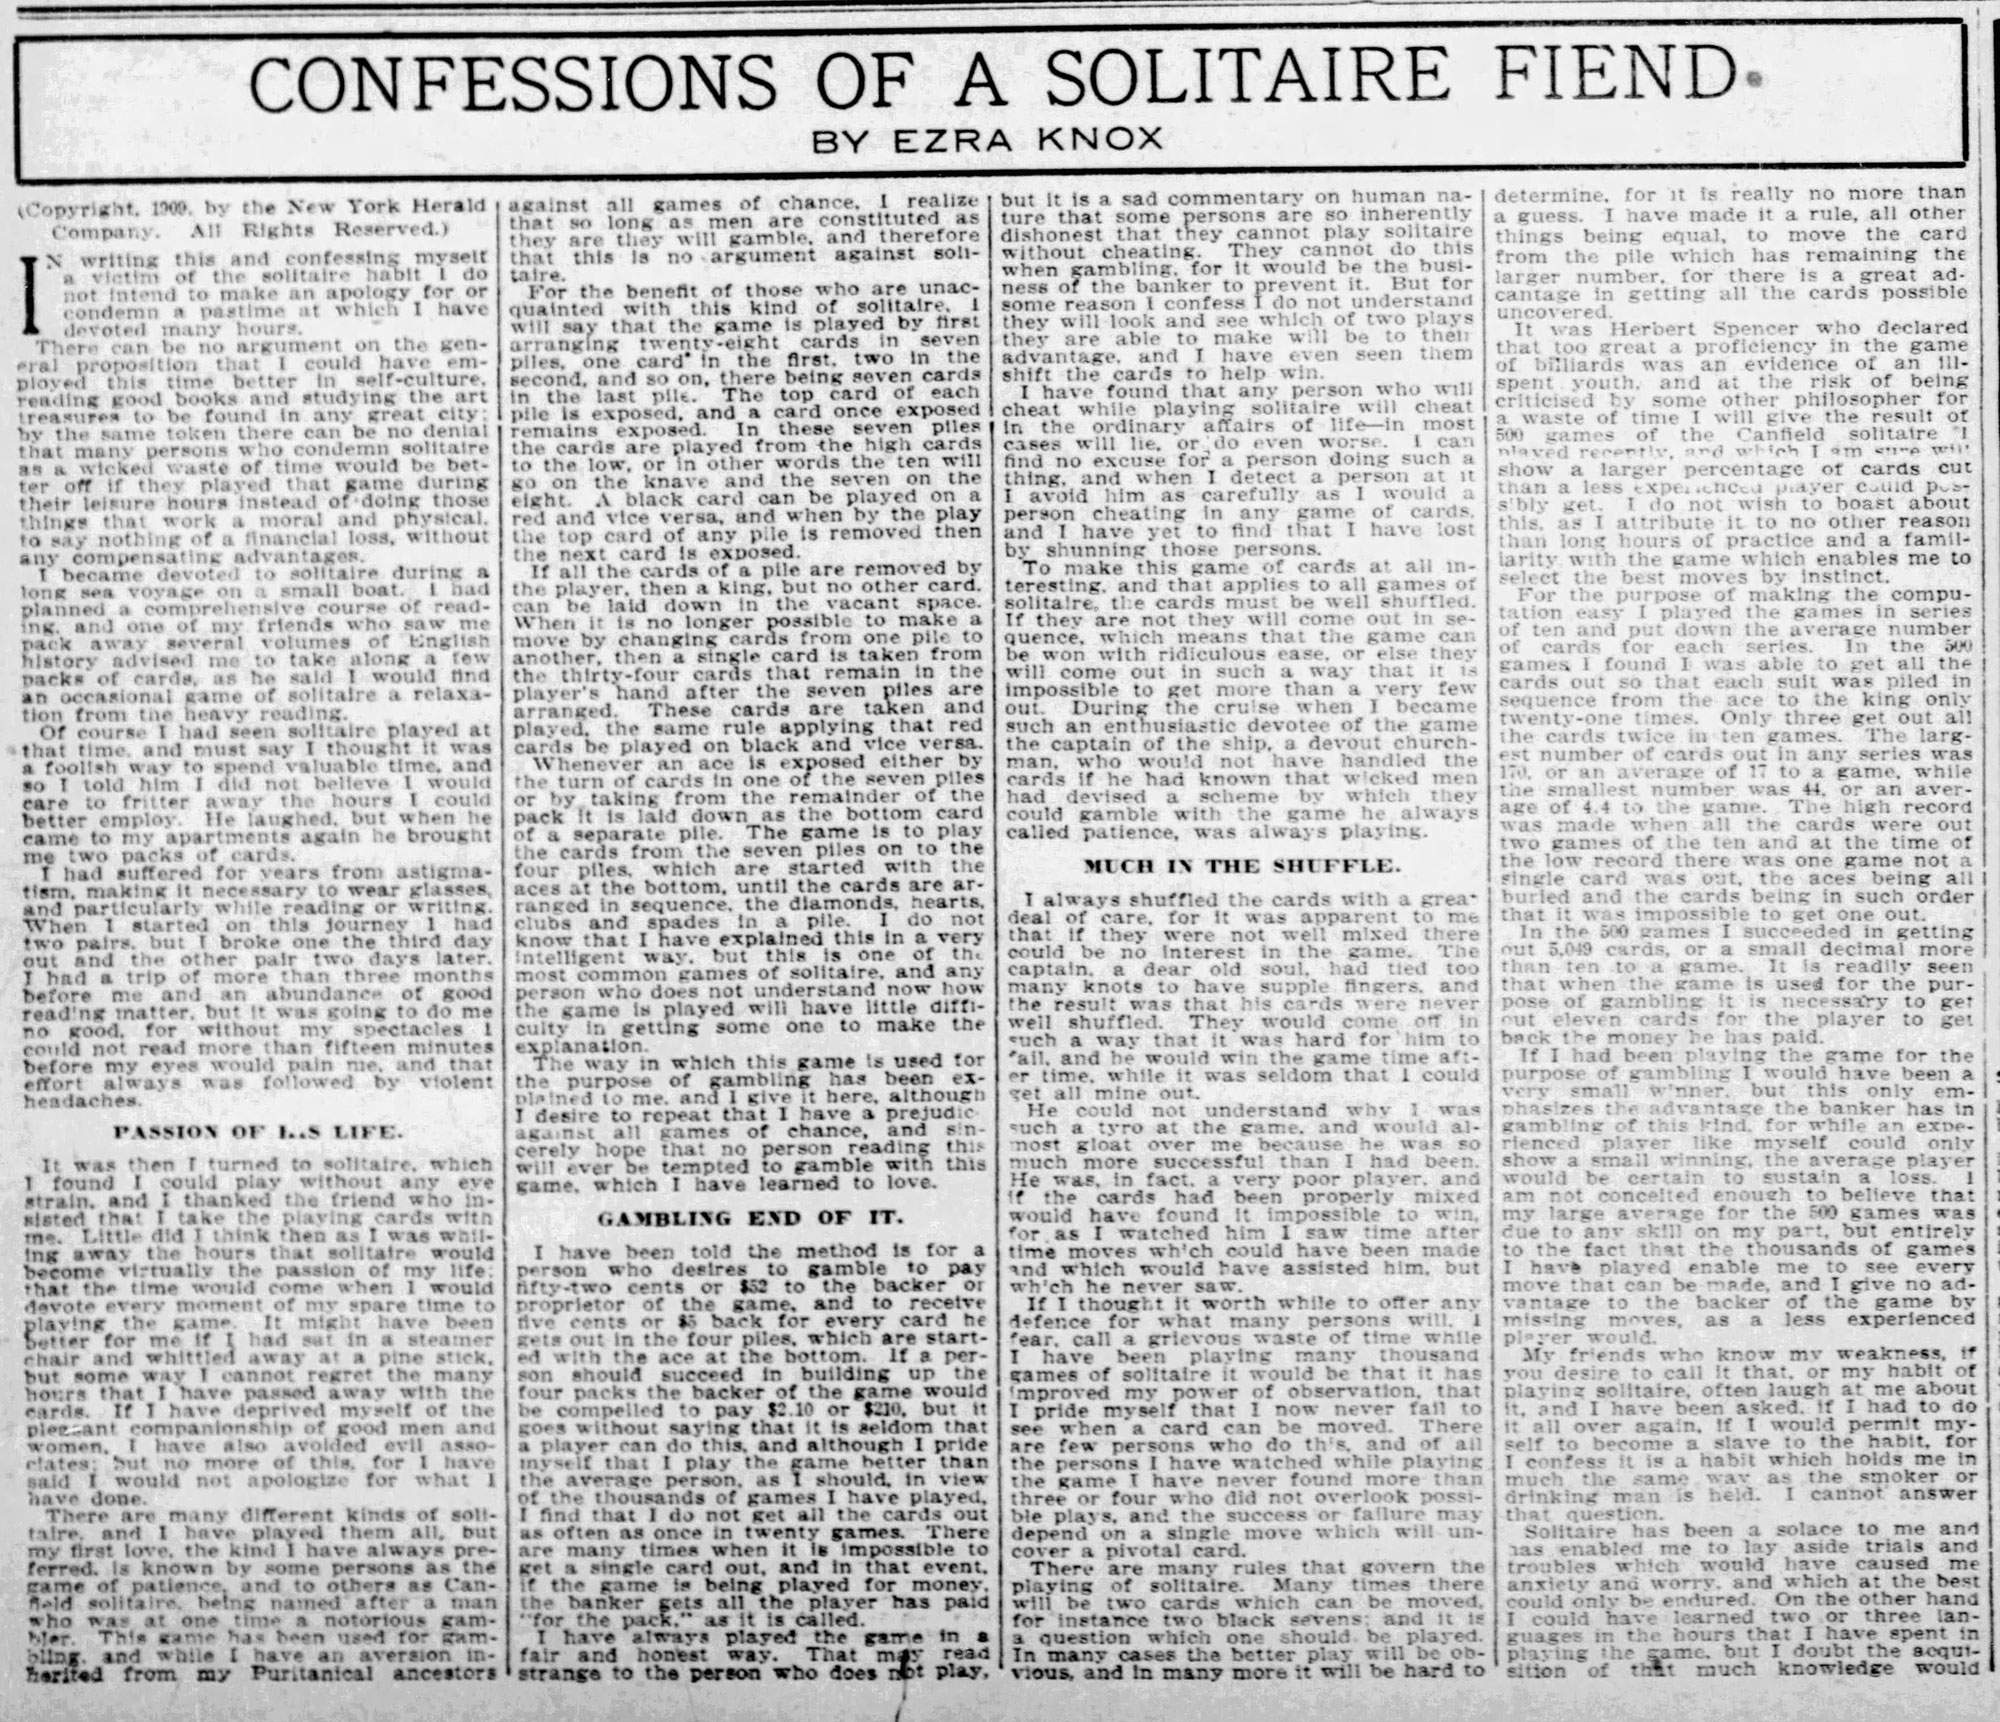 1909 Confessions of a Solitaire Friend